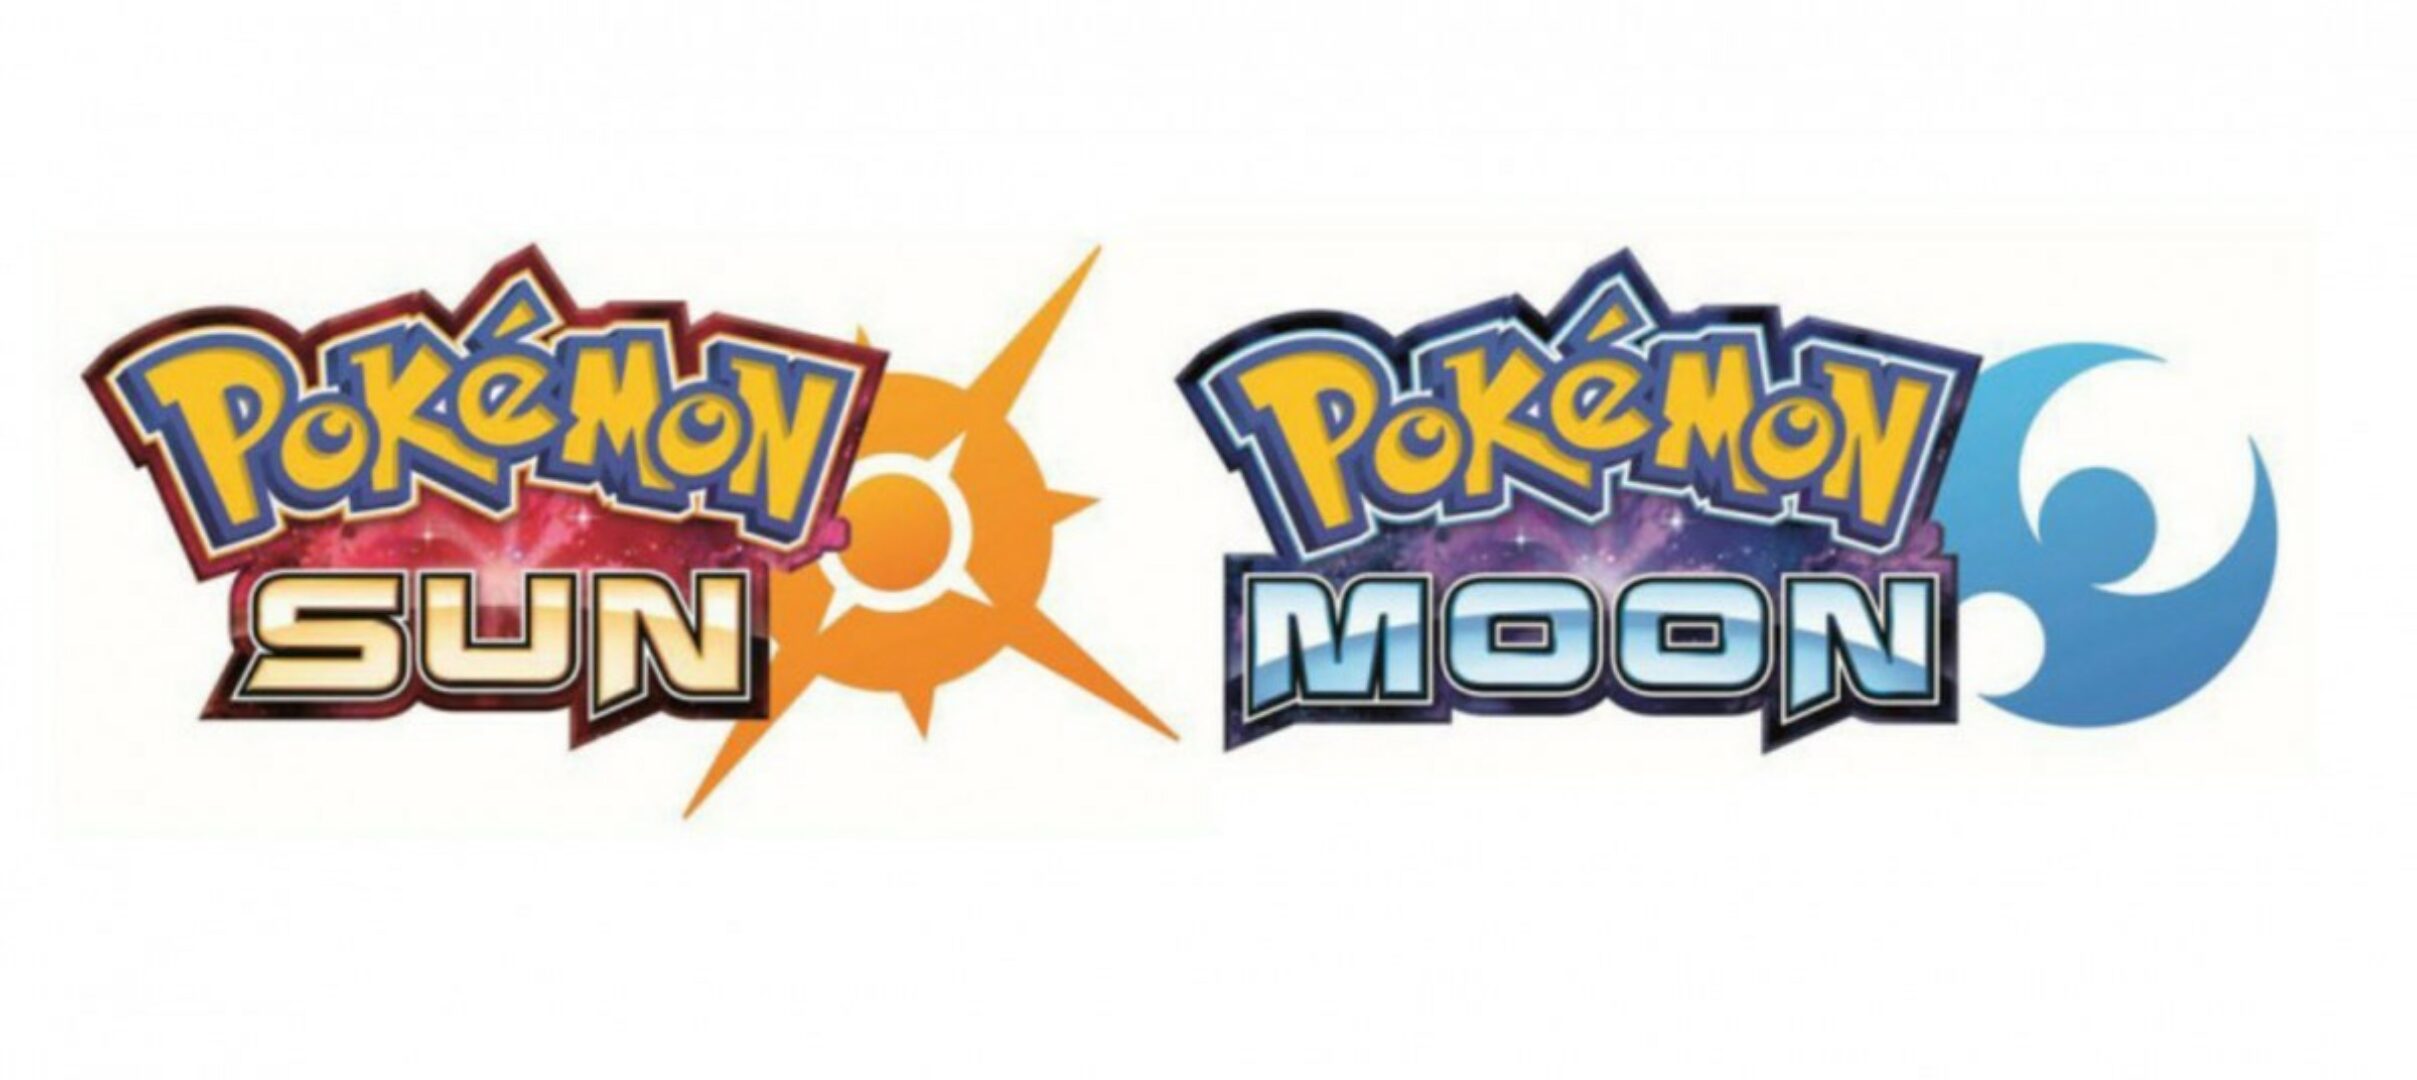 Get Ready To Catch Even More: New Pokemon Announced